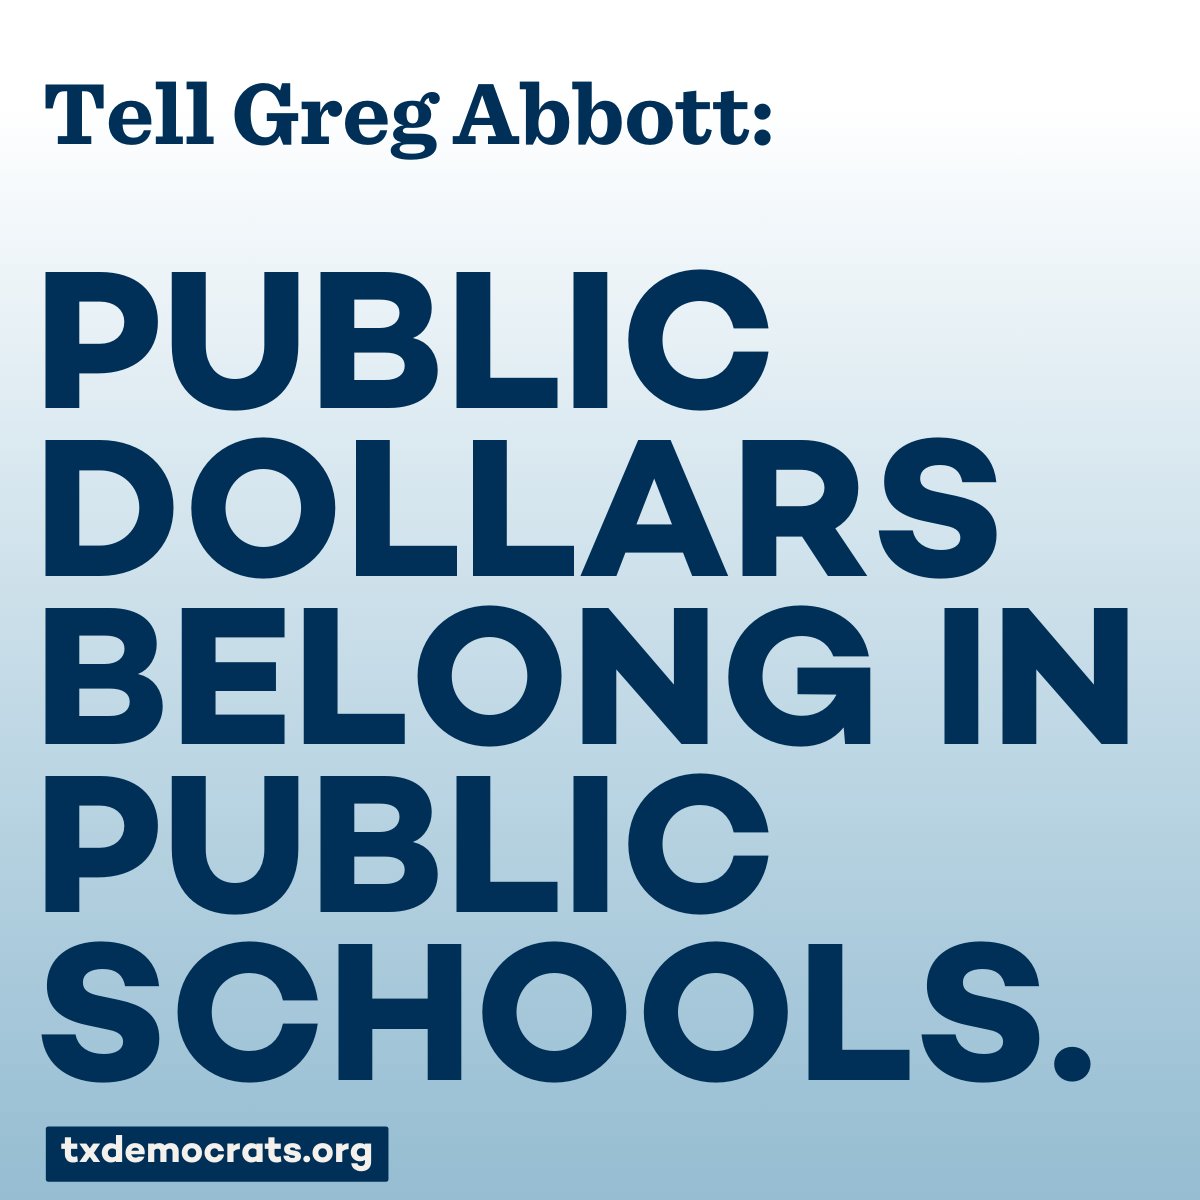 Greg Abbott is holding public education funding hostage. 

We need to stop Abbott's failed voucher scheme once and for all.